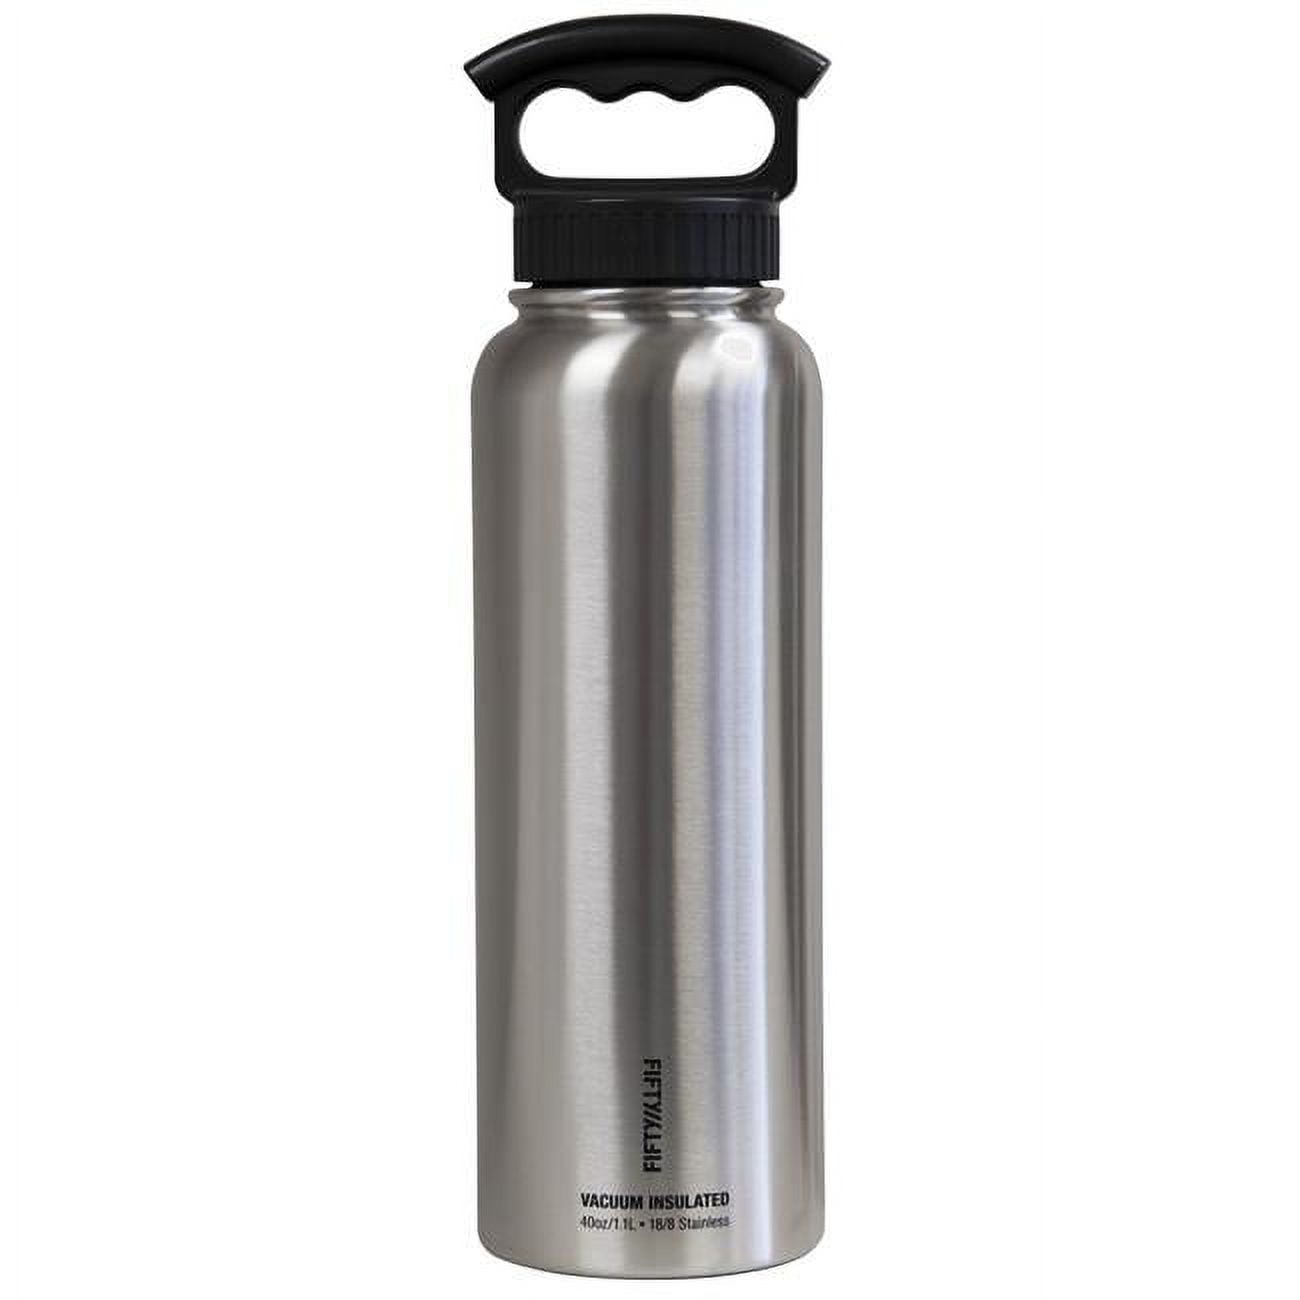 JoyJolt Vacuum Insulated Water Bottle with Flip Lid & Sport Straw Lid - 32  oz Large Hot/Cold Vacuum Insulated Stainless Steel Bottle - White